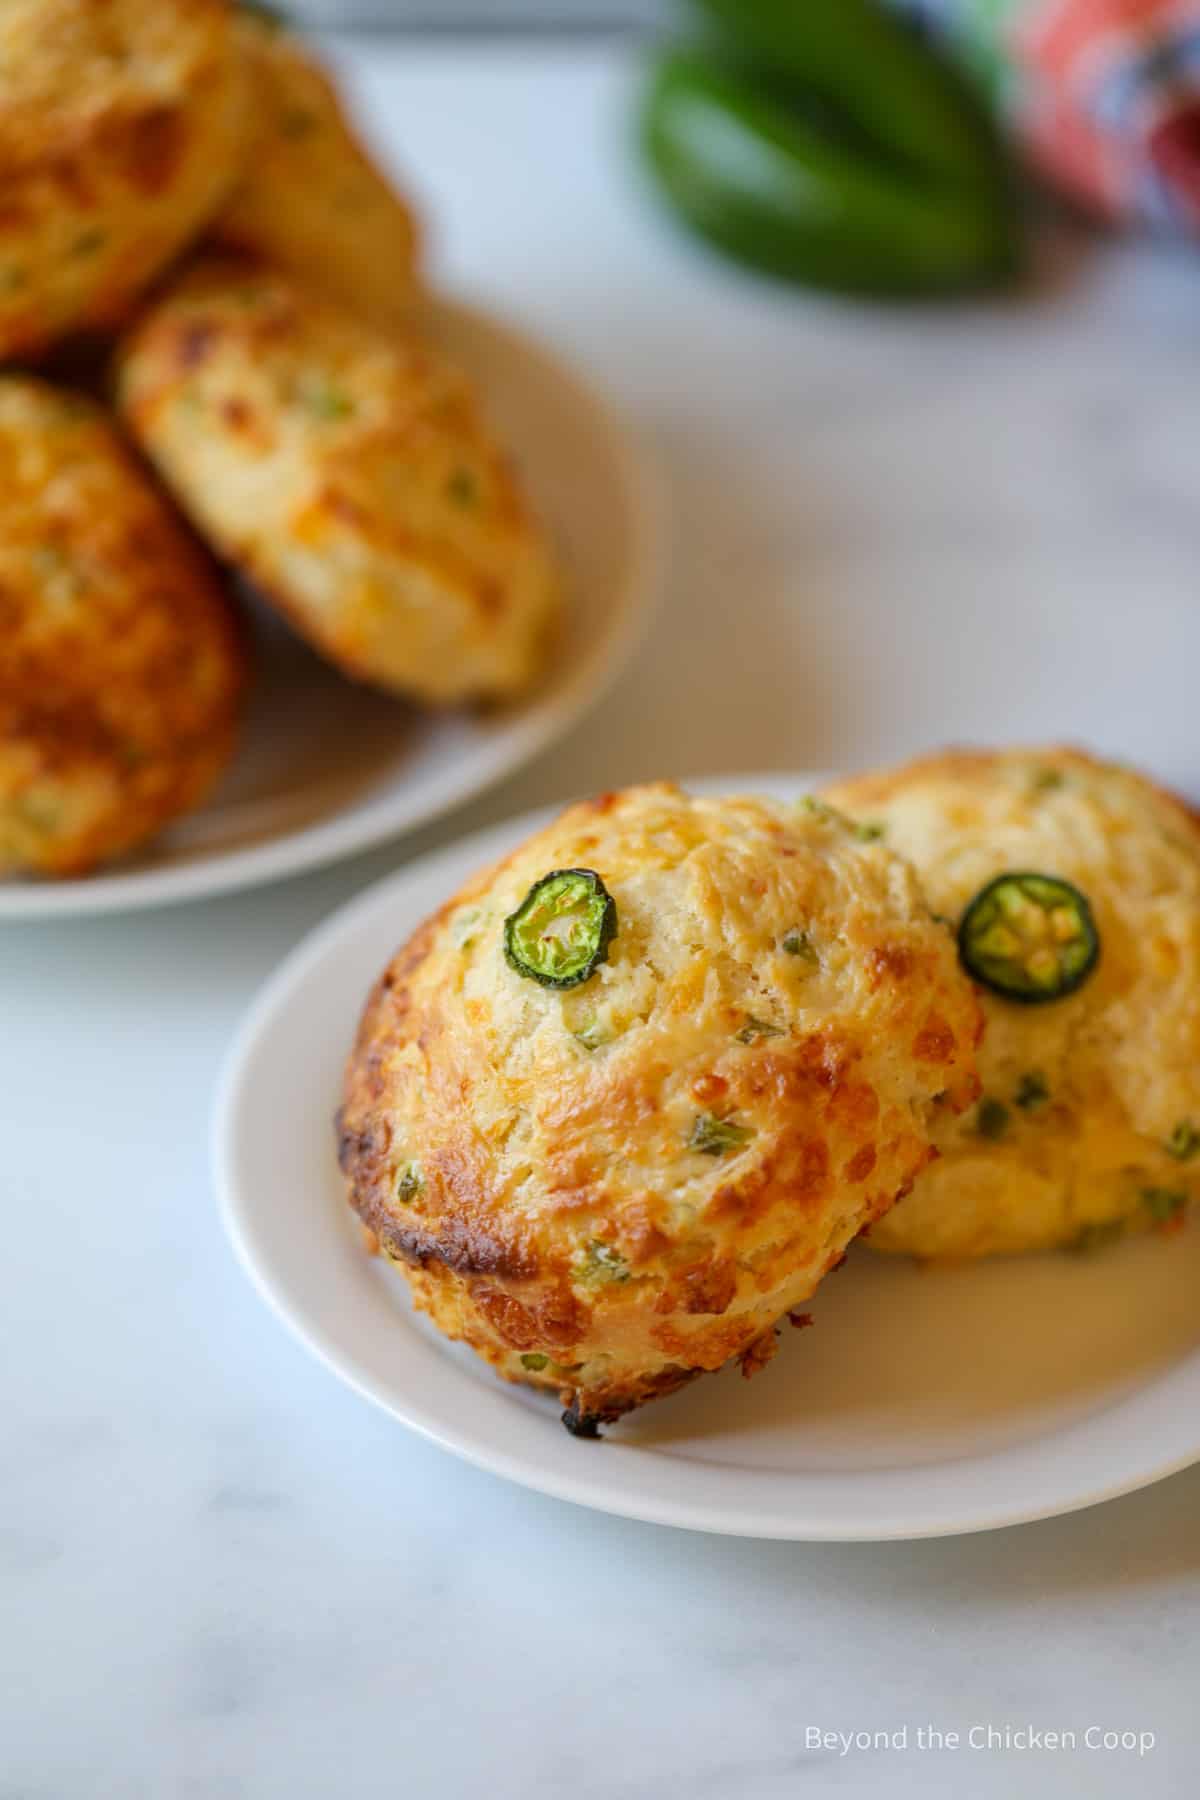 Biscuits topped with sliced jalapenos on a small plate.